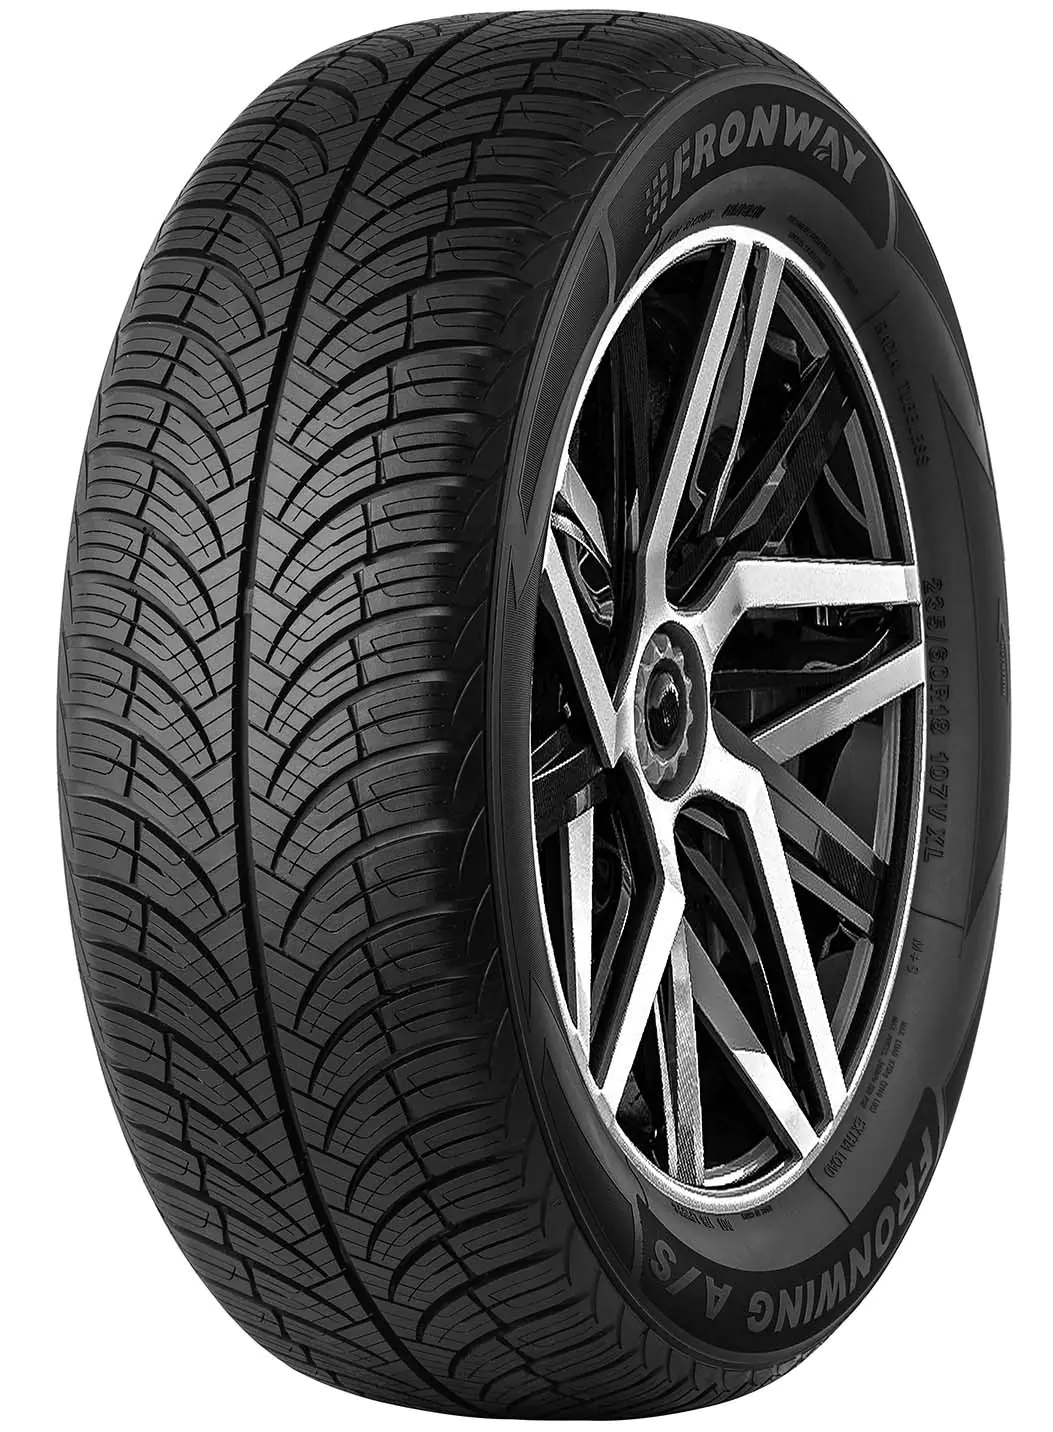 Fronway Fronway 215/50 R17 95W FRONWING A/S XL pneumatici nuovi All Season 